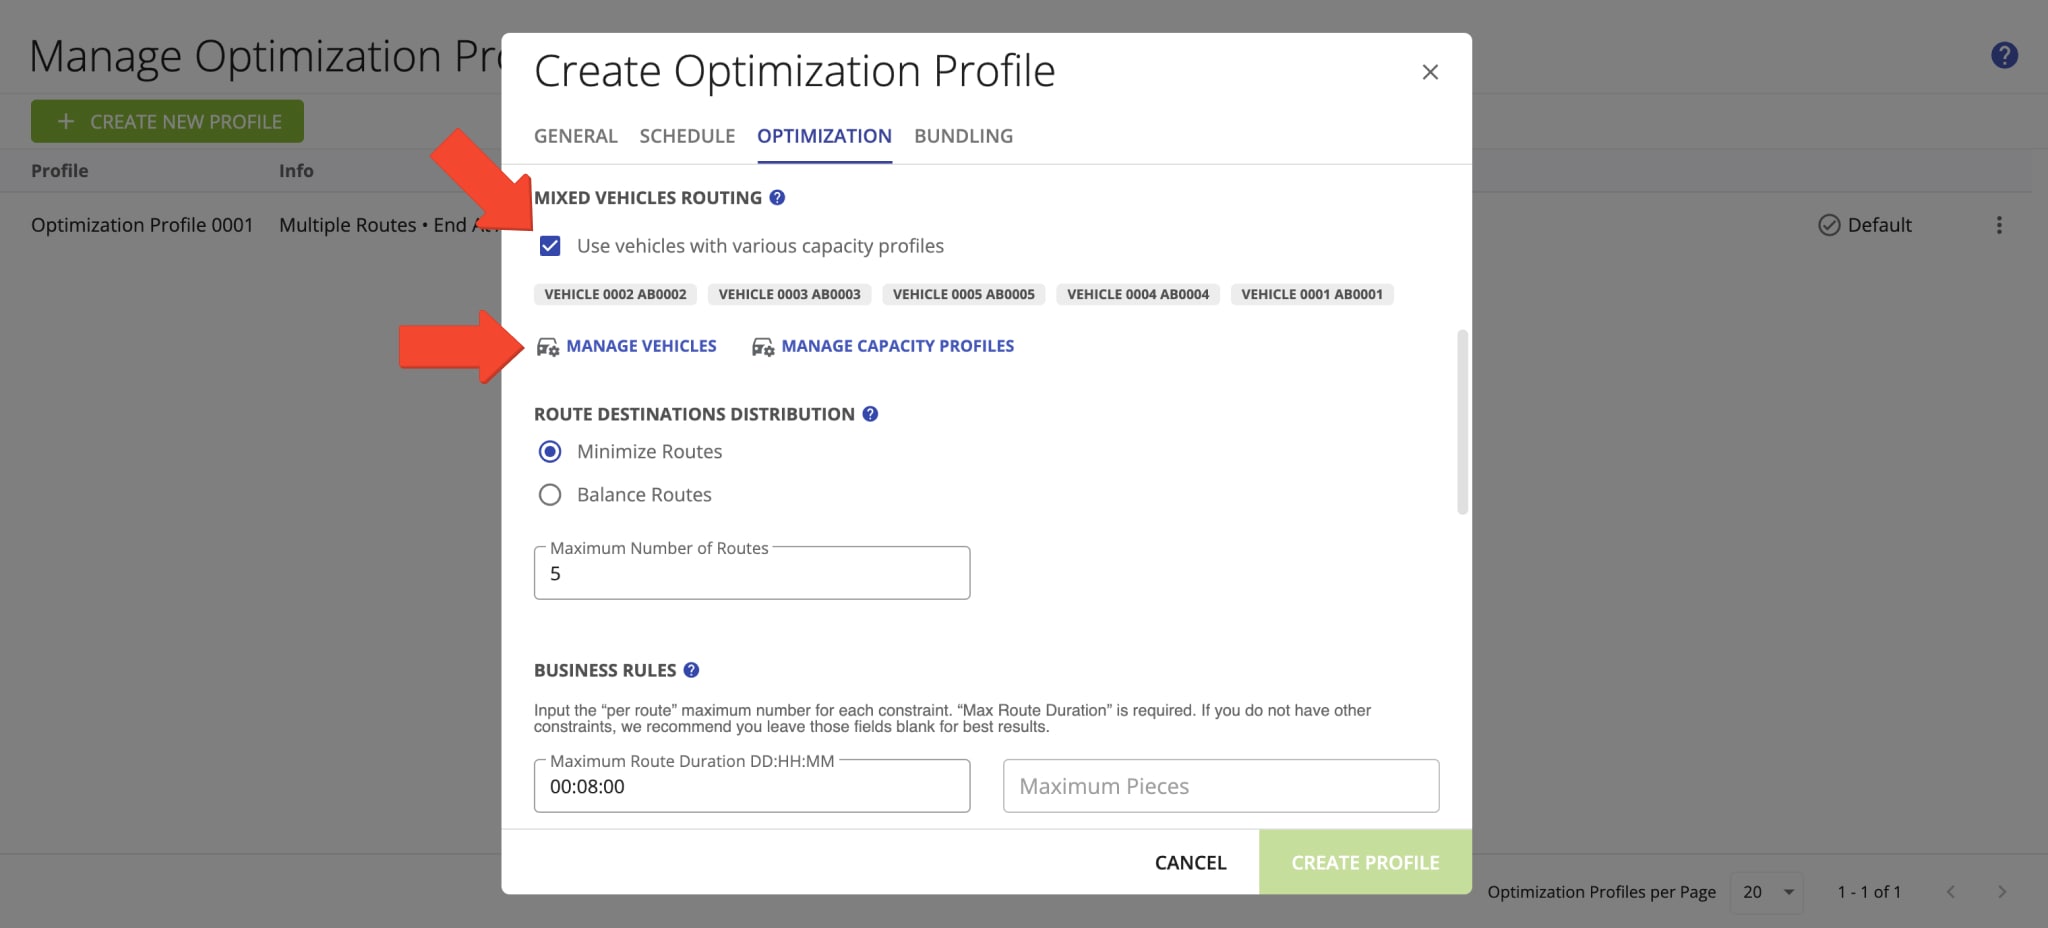 When creating or editing an existing Optimization Profile, go to the "Optimization" tab. Then, check the "Use vehicles with various capacity profiles" box to enable mixed fleet routing.